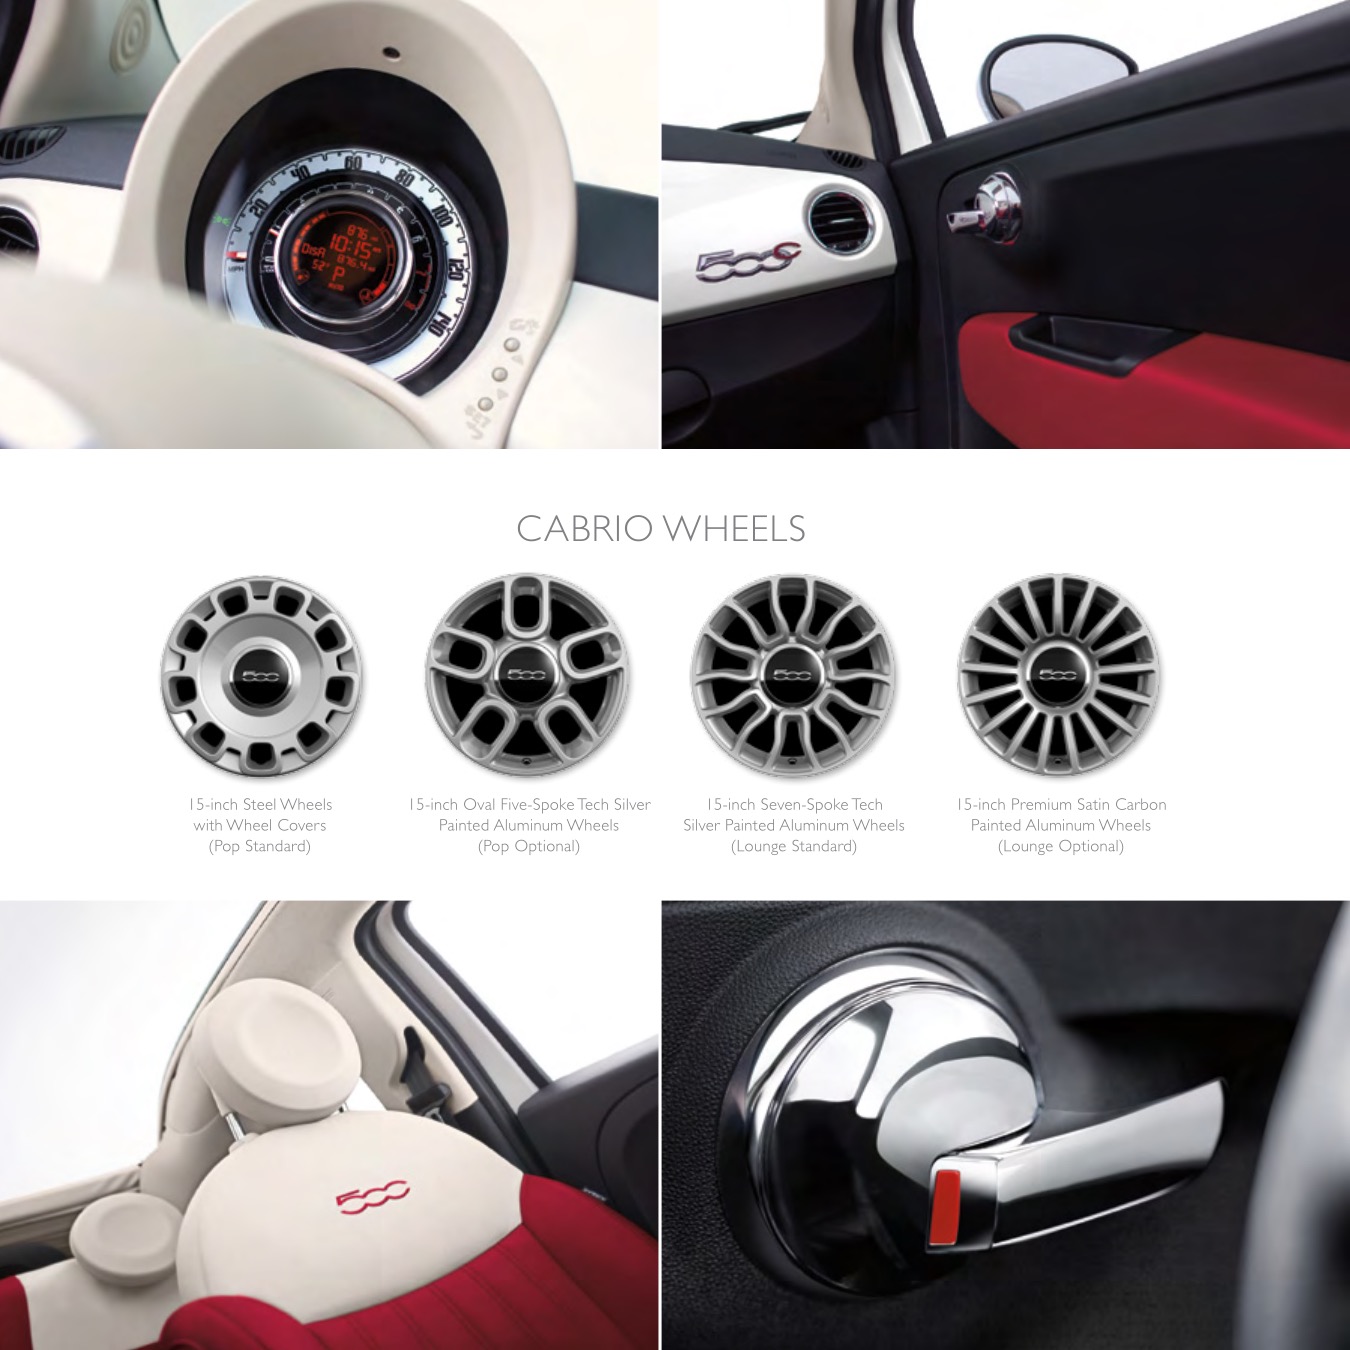 2015 Fiat 500 Brochure Page 50